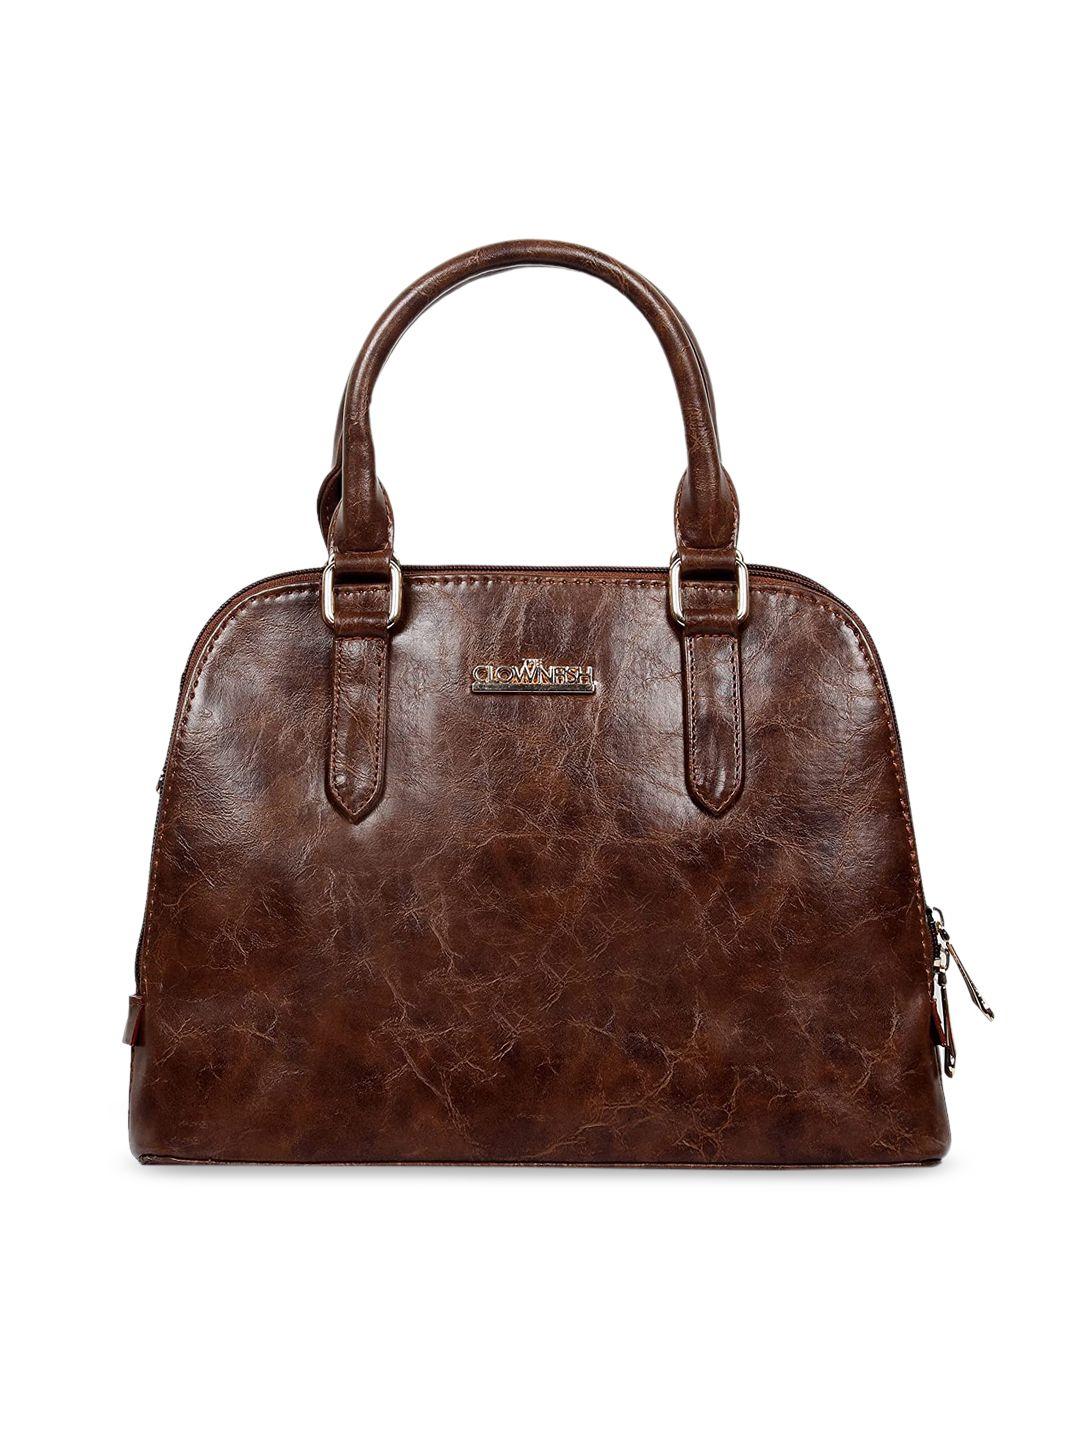 the clownfish brown textured leather structured handheld bag